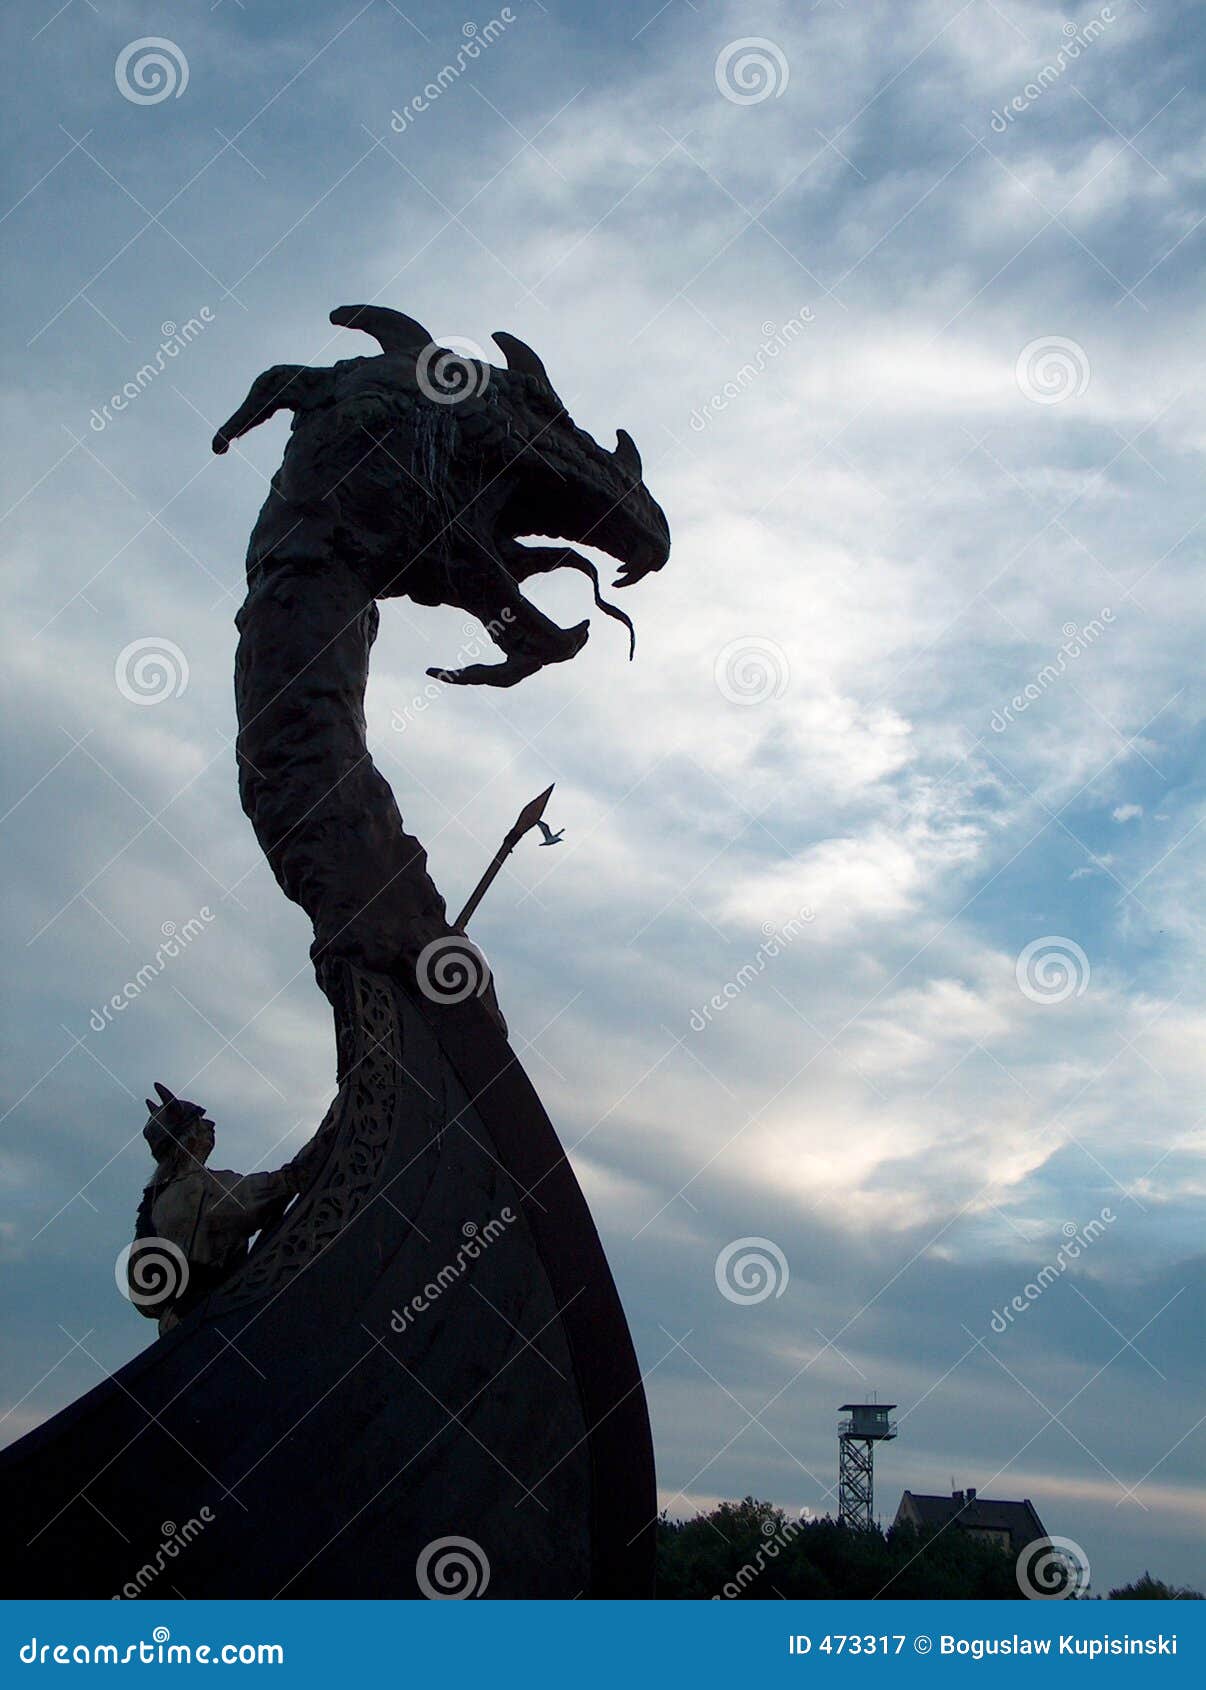 Viking's Dragon On The Boat Royalty Free Stock Photography ...